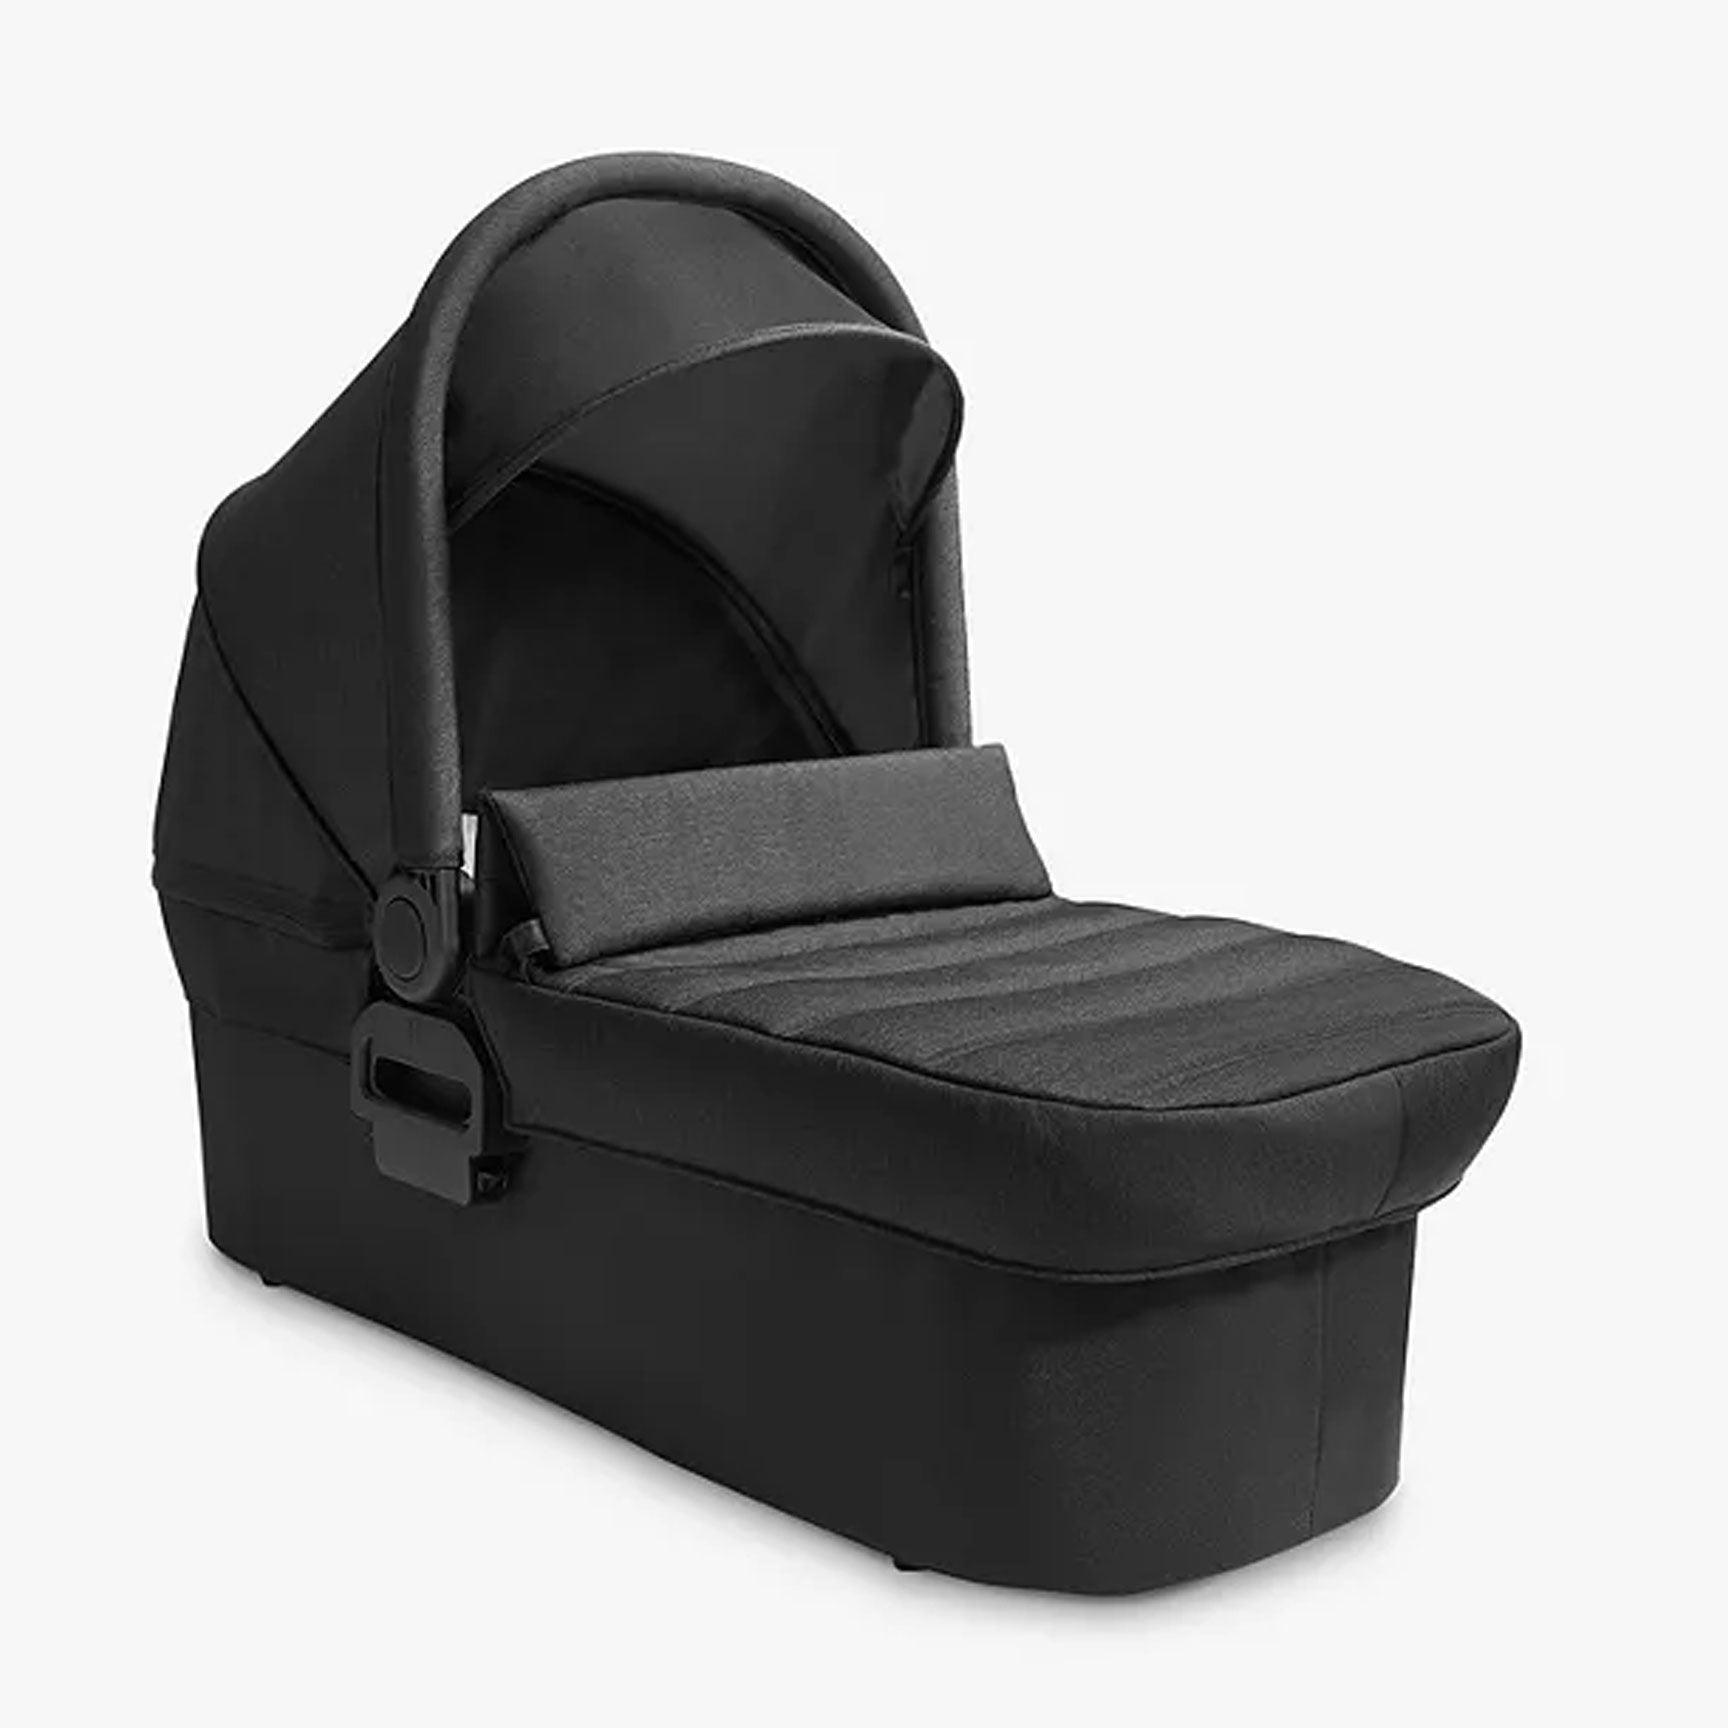 Baby Jogger Double Carrycot in Opulent Black Double & Twin Prams 2149932